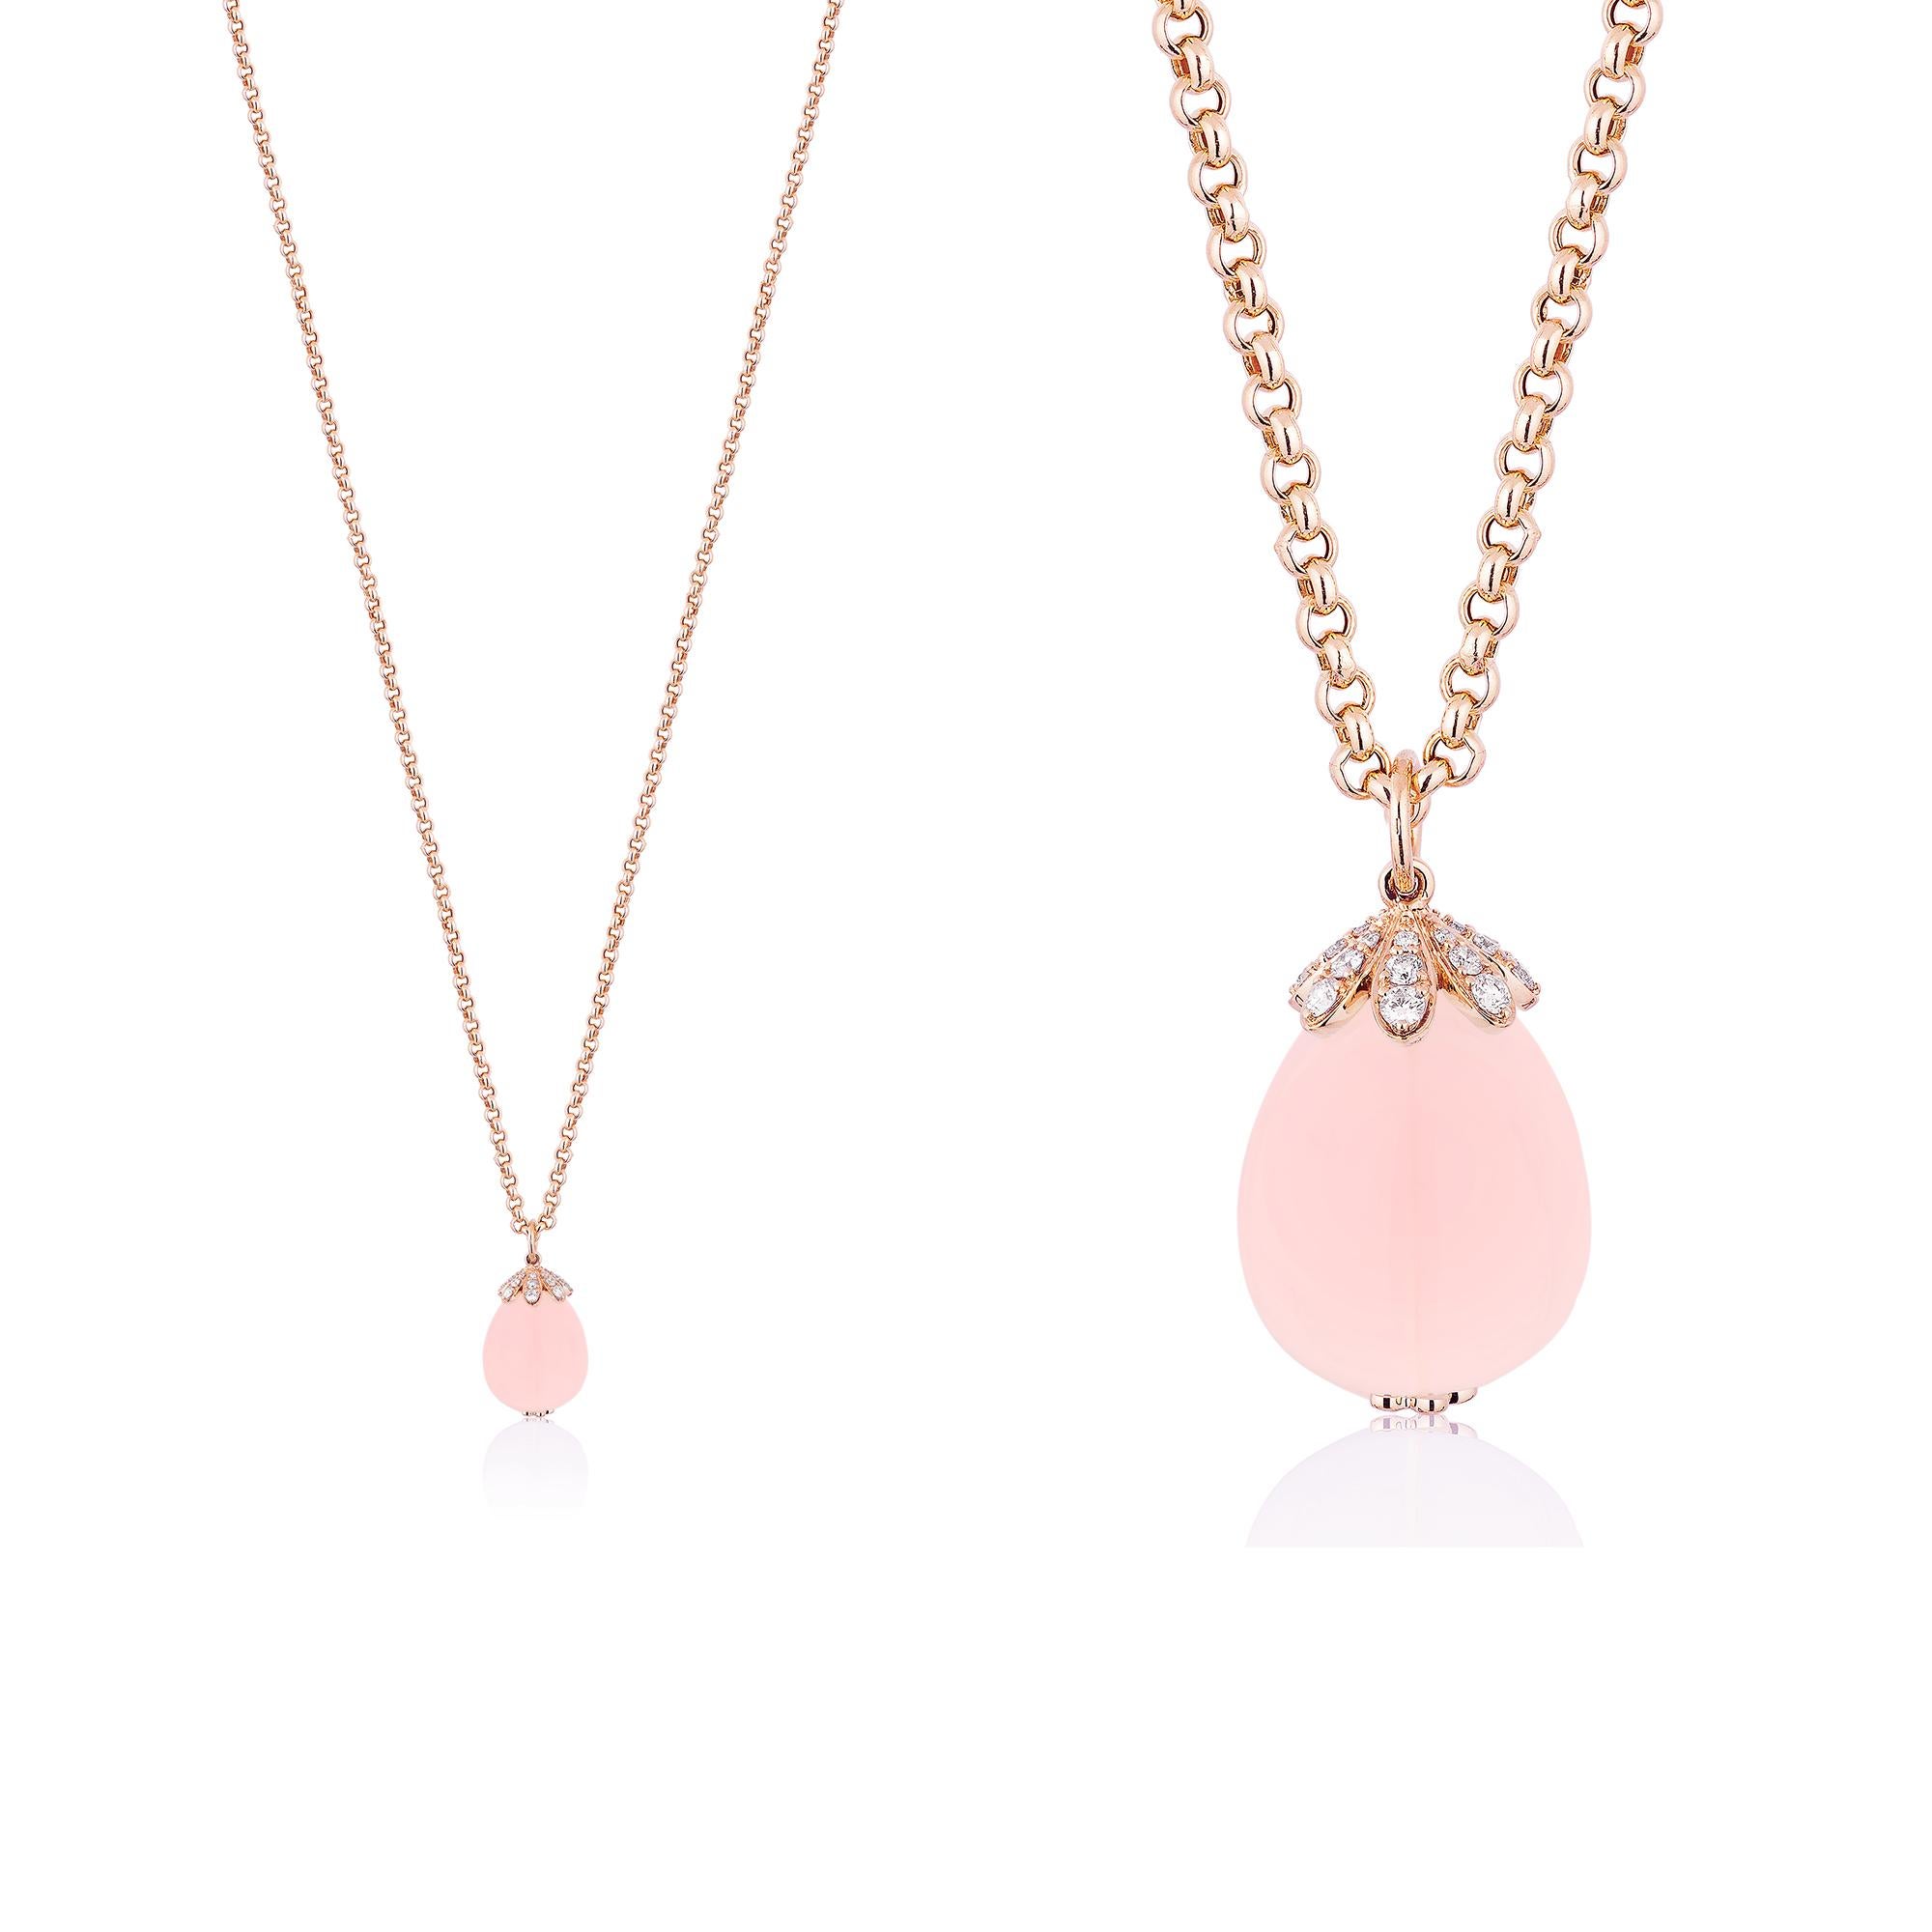 Large Drop Rose Quartz Pendant with Diamonds, from 'Naughty' Collection in 18K Rose Gold. This collection has dangerous curves tied with exotic colors. When unveiled, these pieces will bring a smile to the conservative aficionado.

* Gemstone size: